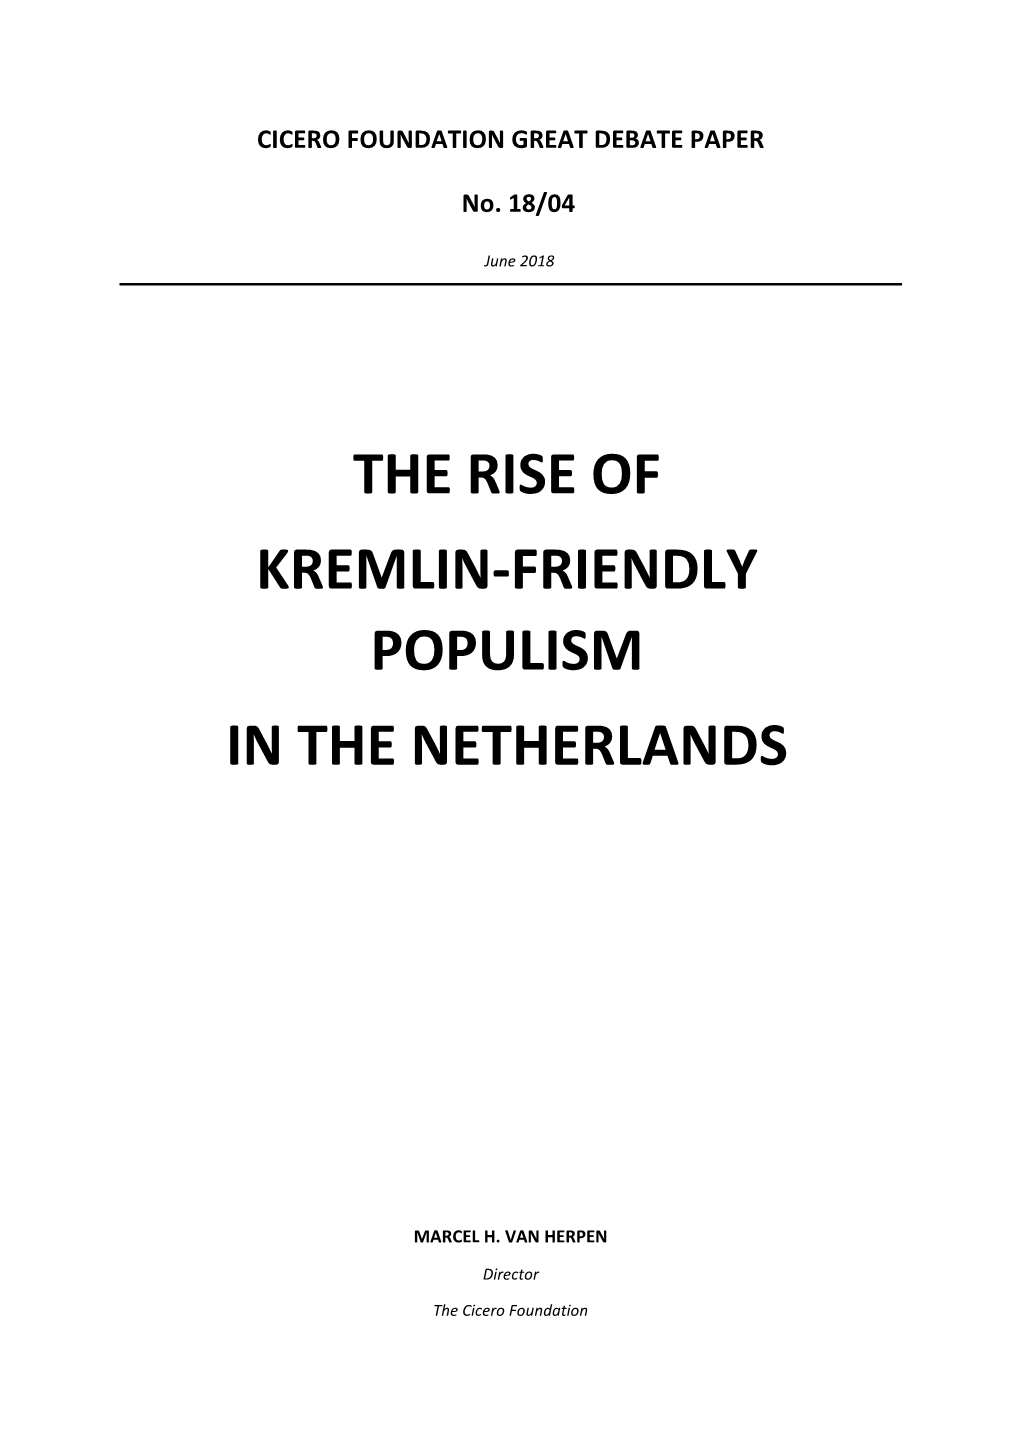 The Rise of Kremlin-Friendly Populism in the Netherlands